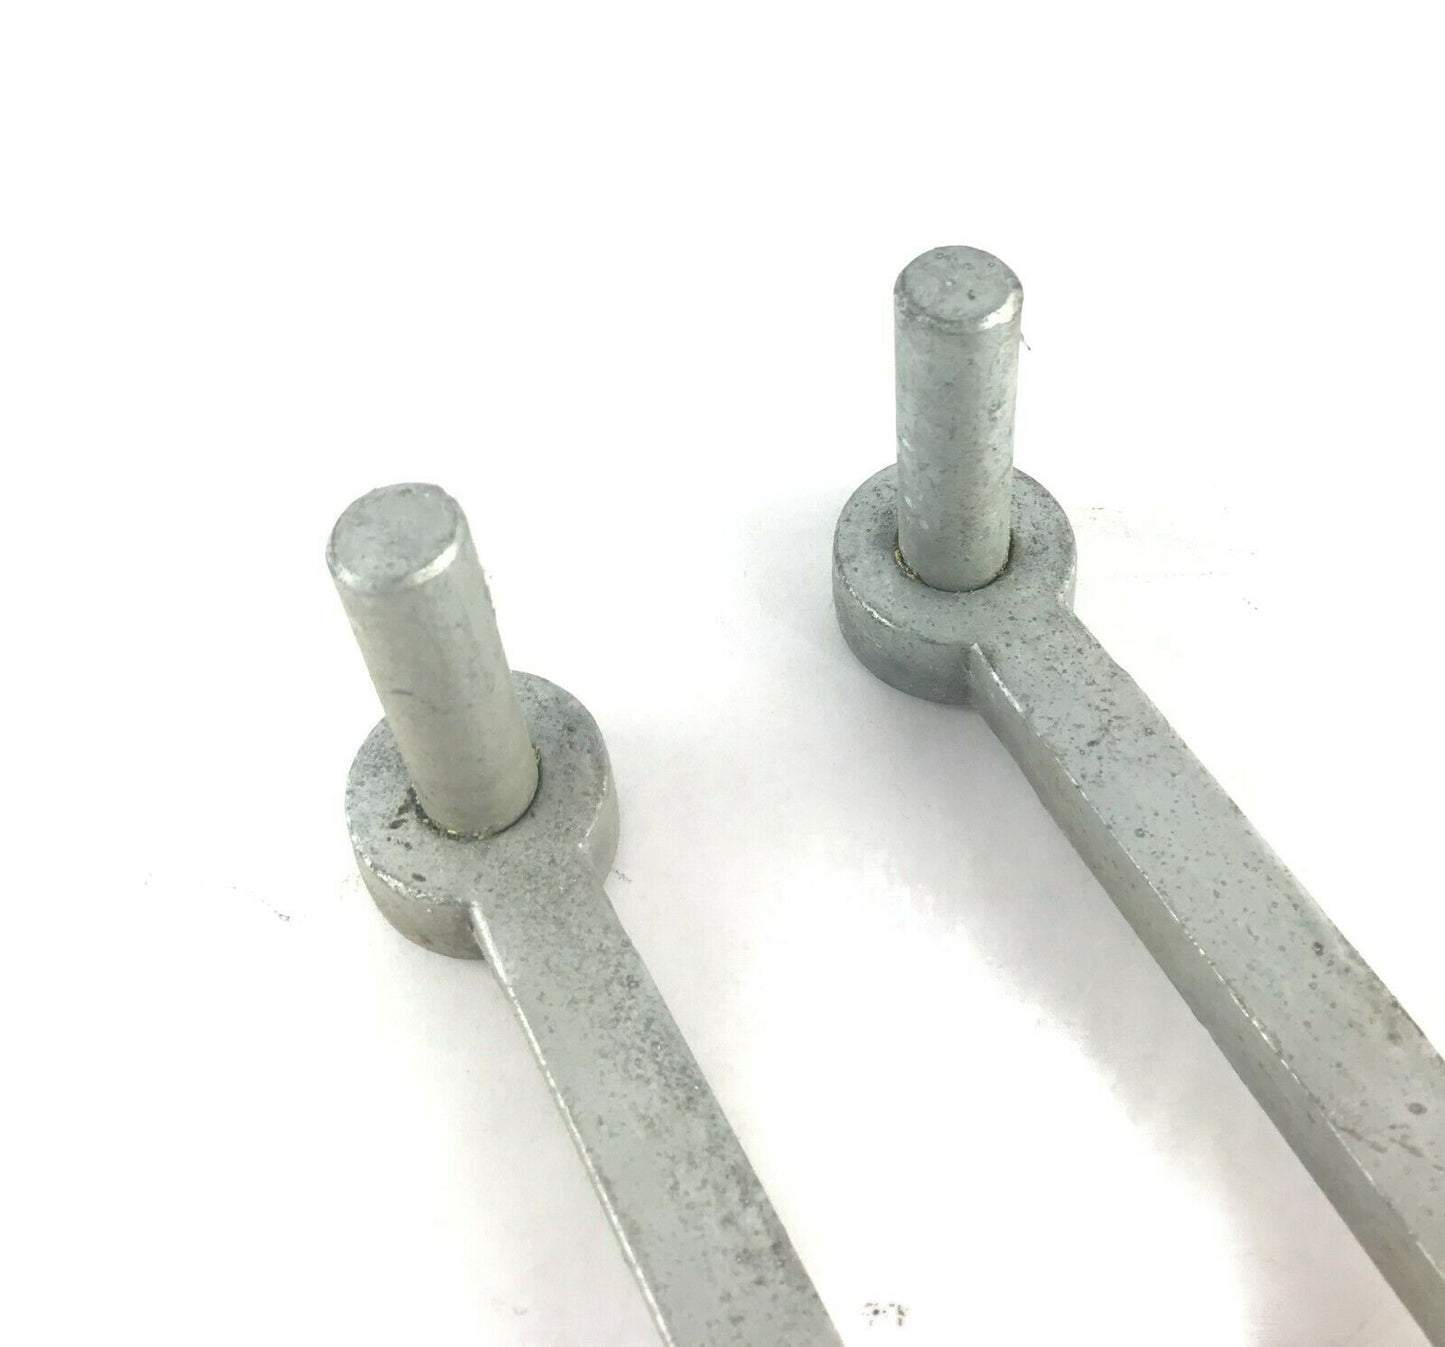 Hook To Bolt 19mm Pin 325mm Long to Suit Hook & Band Farm Field Gate Hinges x 2